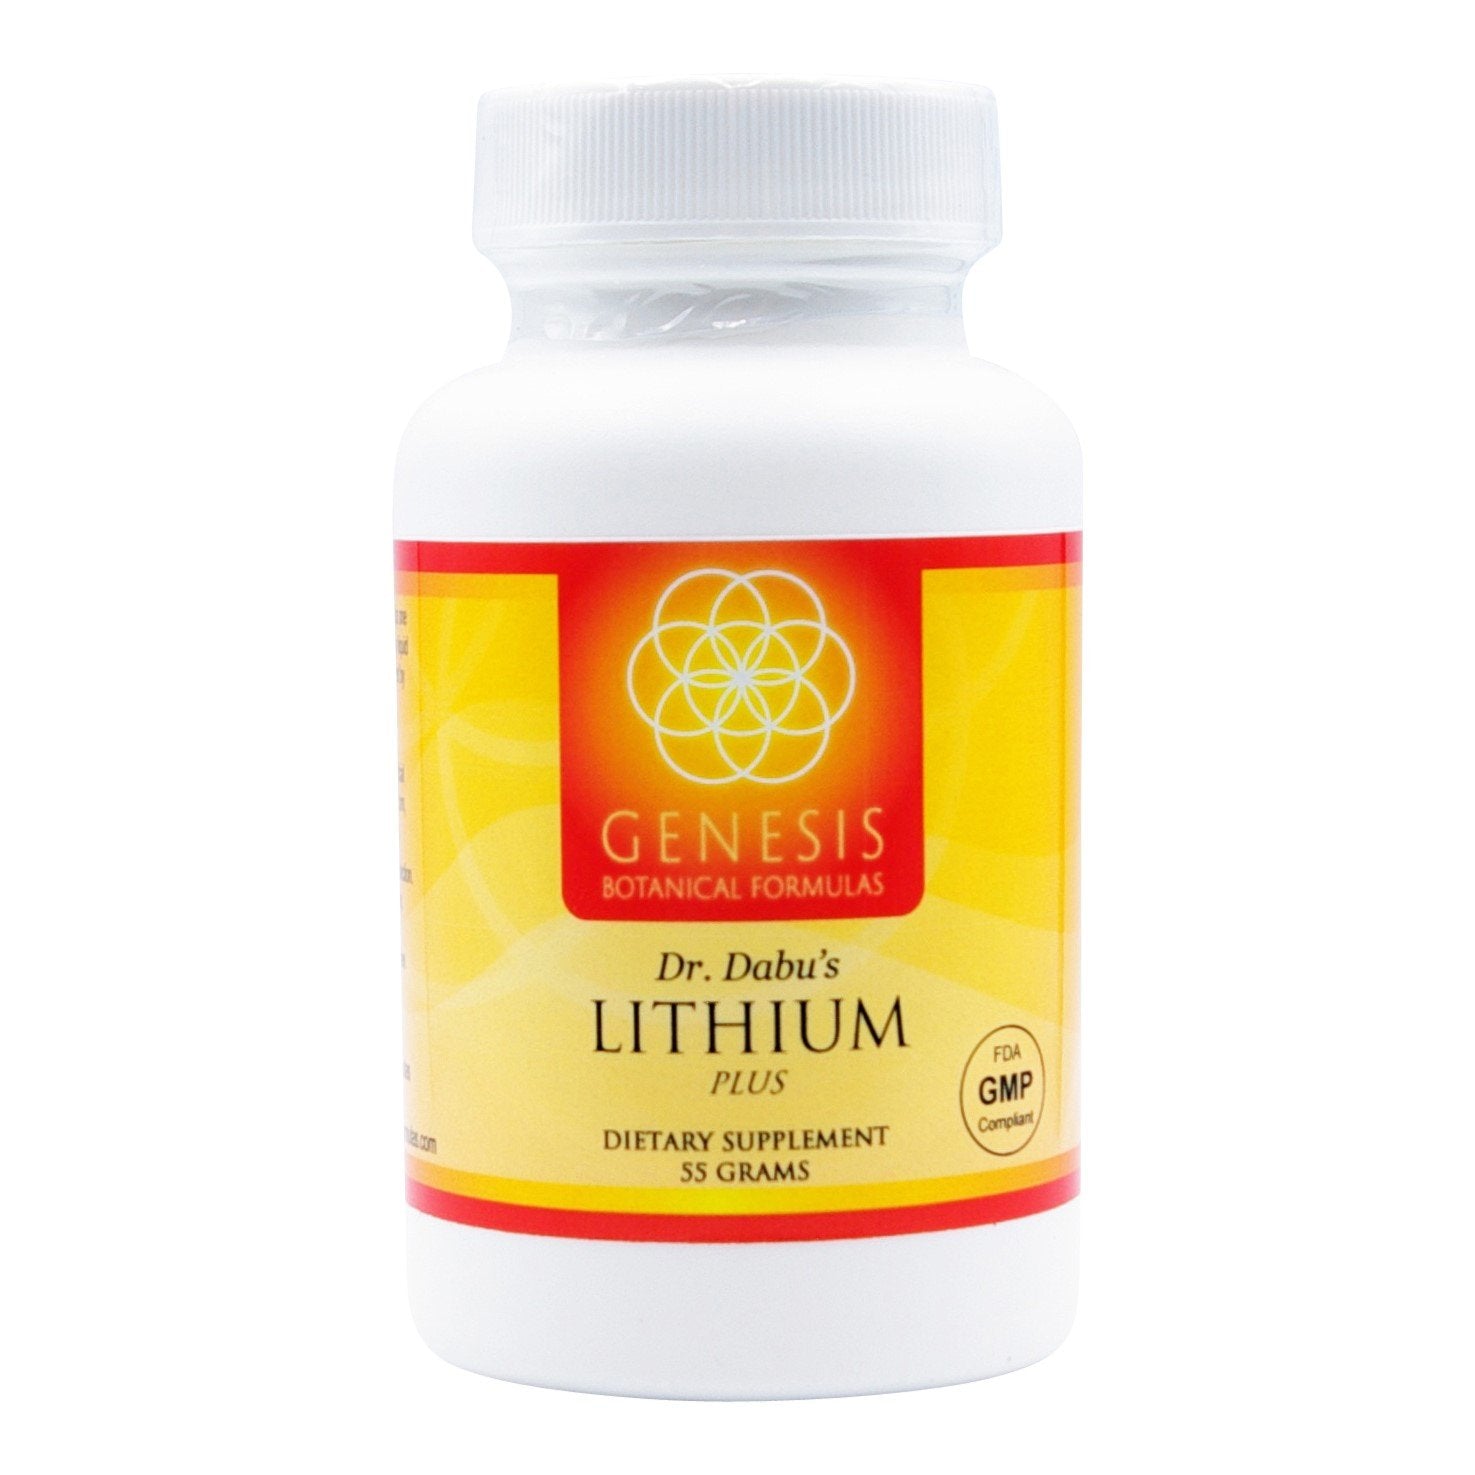 Doctor recommended Lithium Plus natural supplement